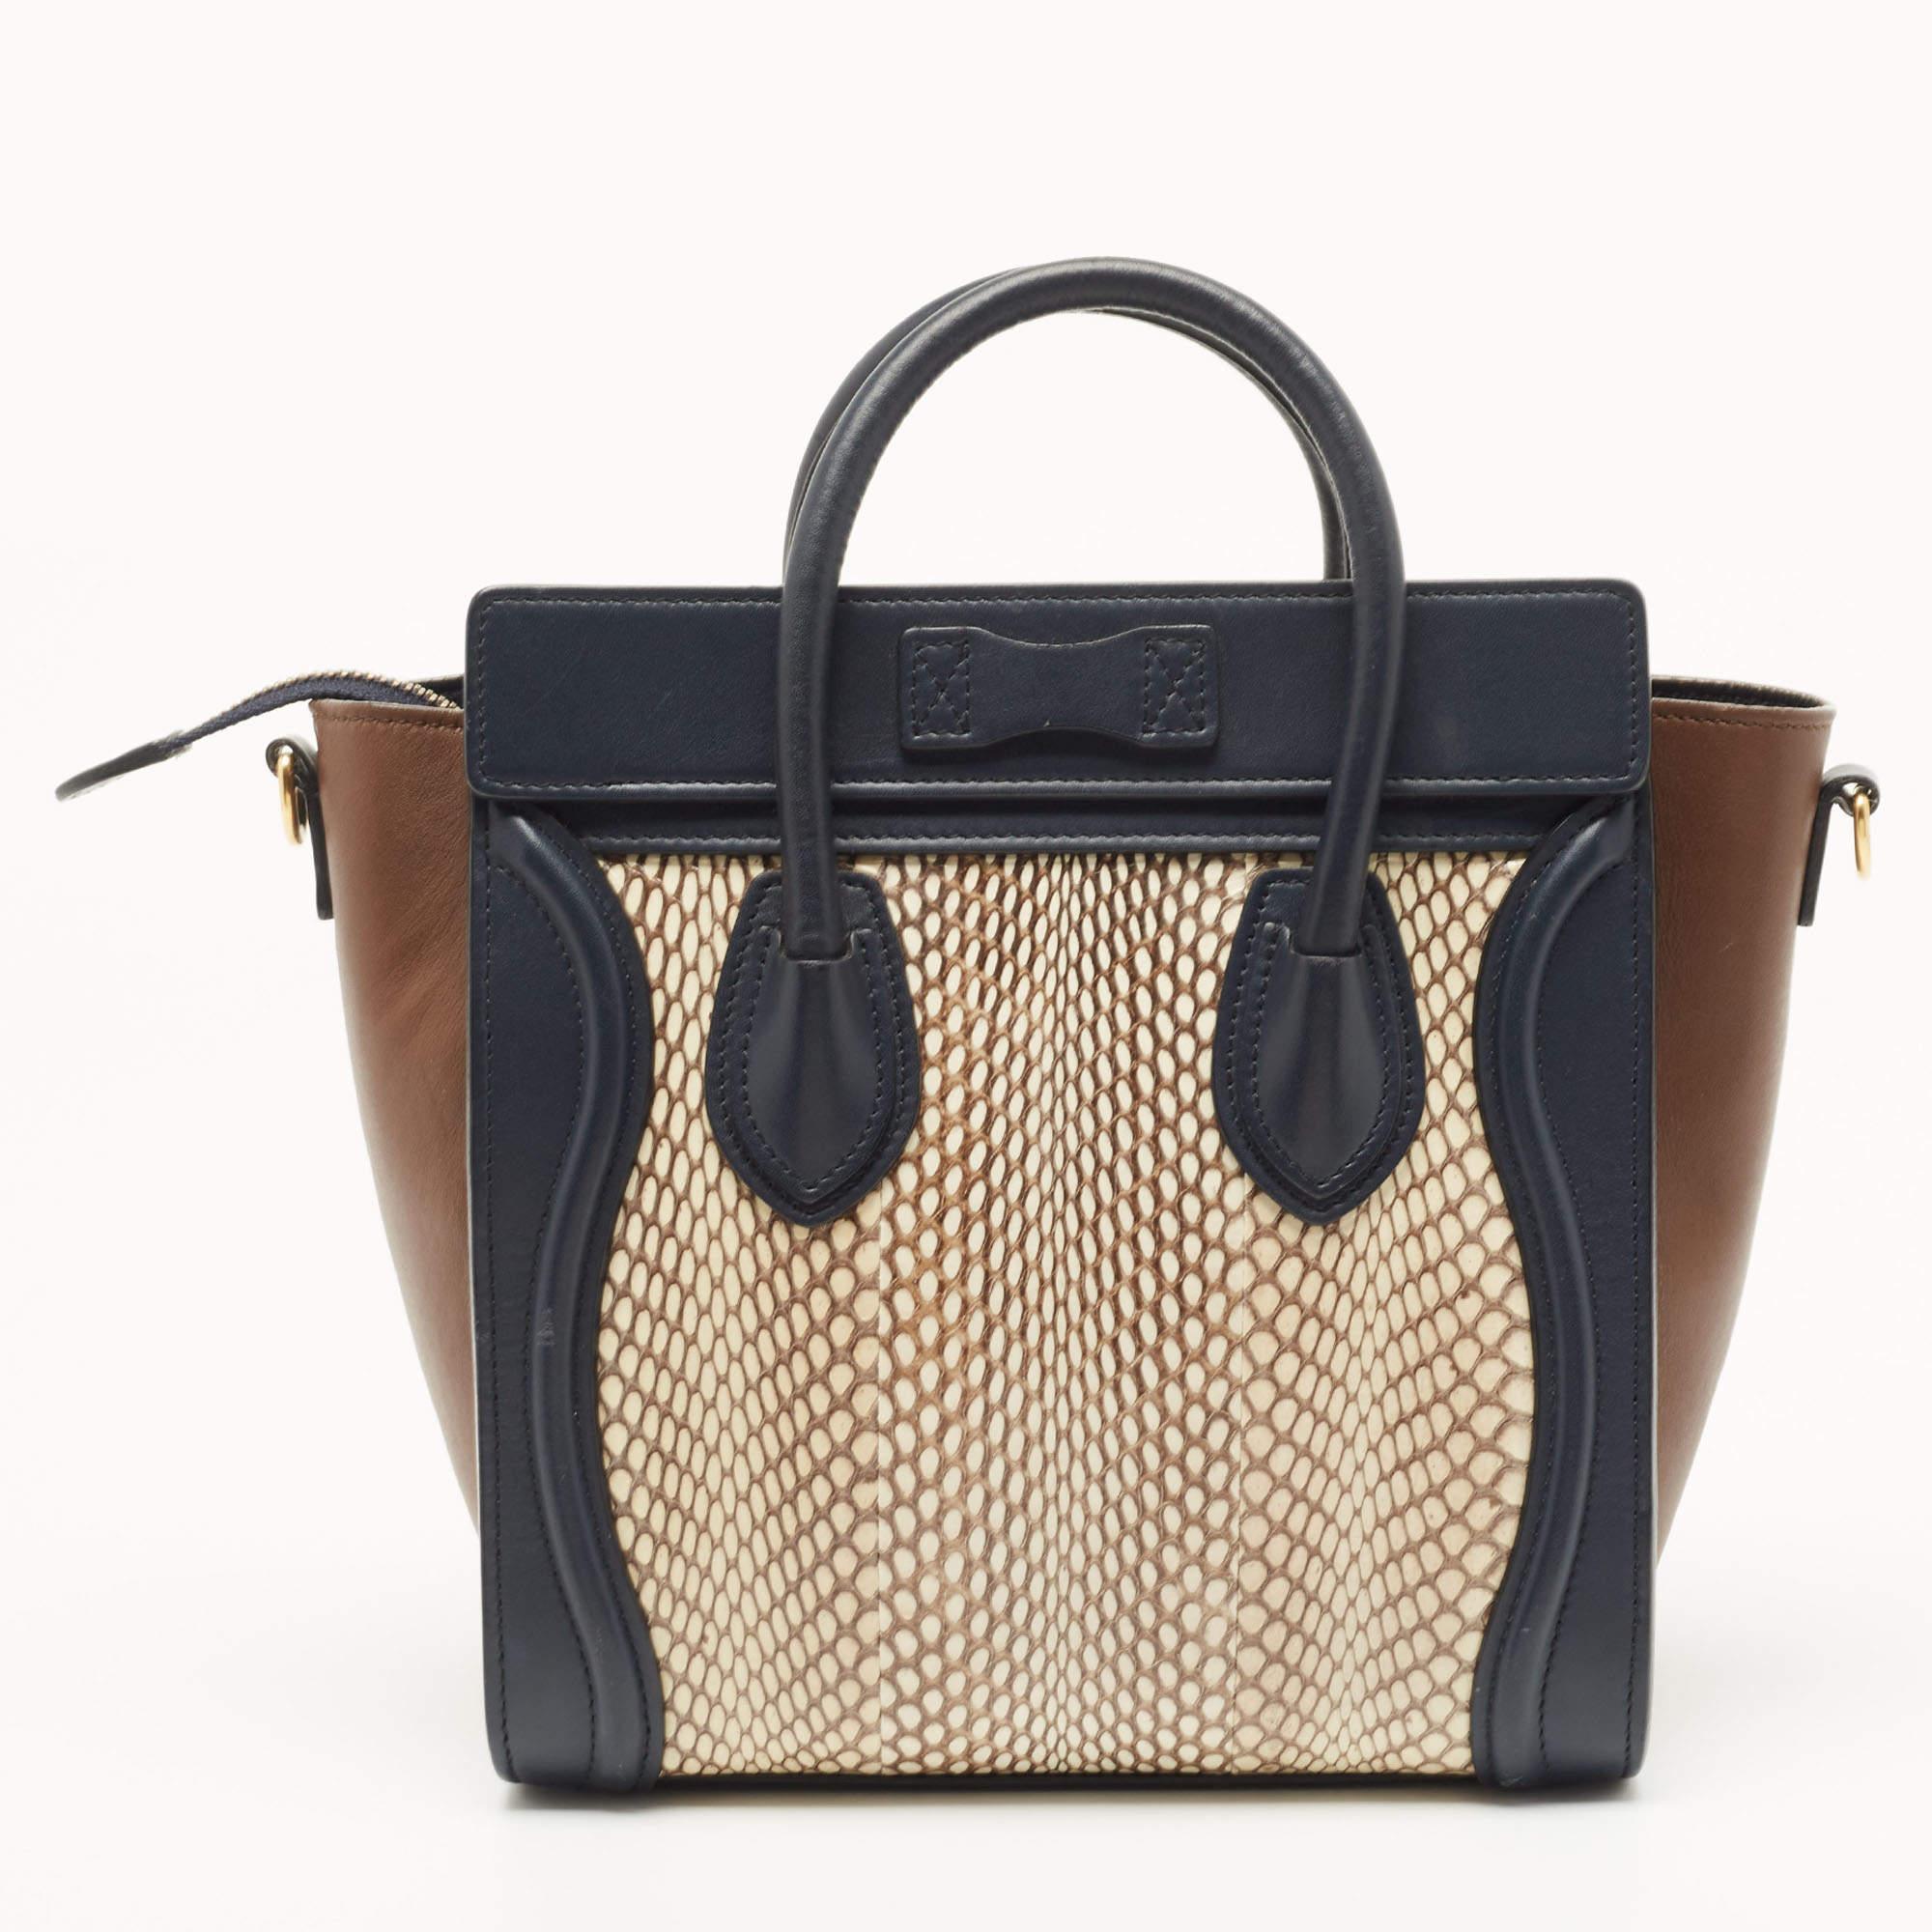 Celine Tricolor Leather and Watersnake Nano Luggage Tote 11